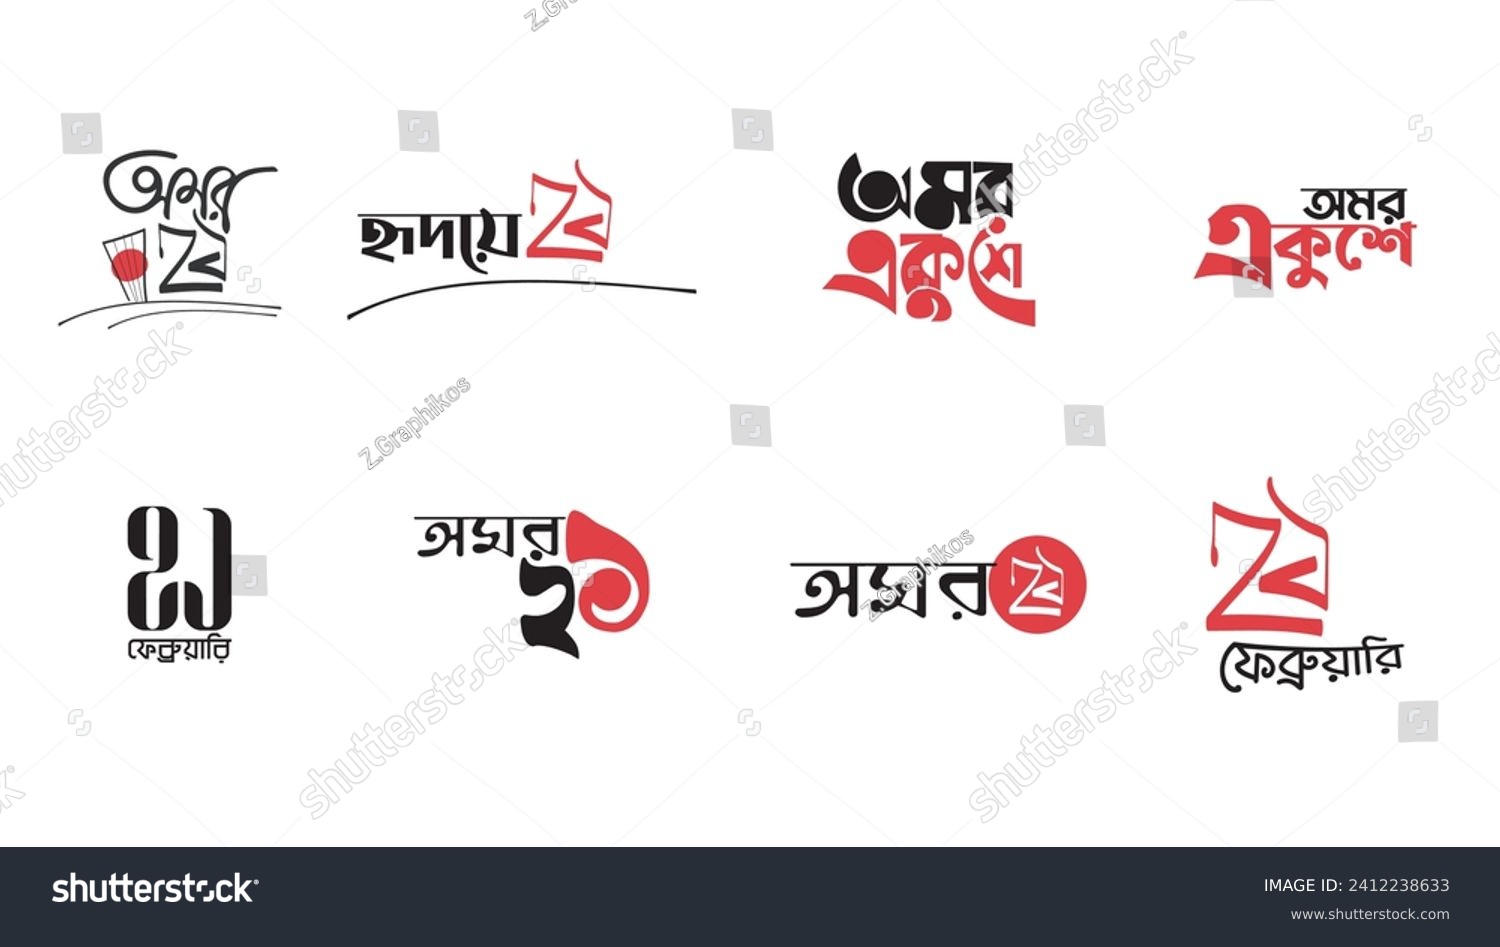 SVG of International Mother Language Day in Bangladesh, 21st February 1952. 